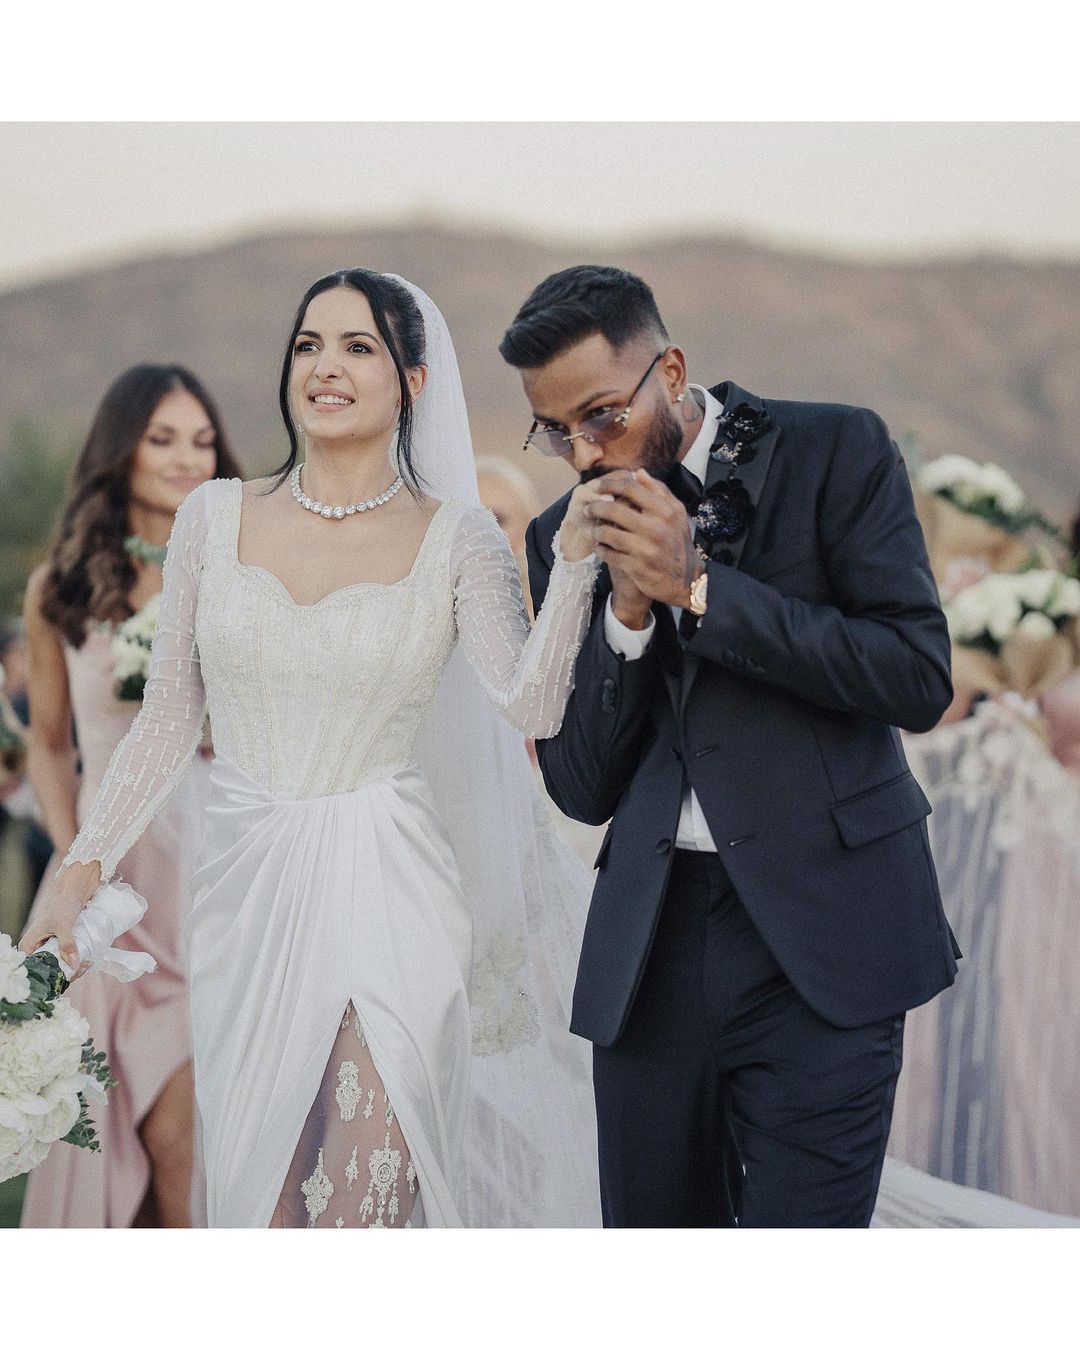 Hardik Pandya And Natasa Stankovic Renew Wedding Vows In Dreamy Ceremony Check Out The Couples